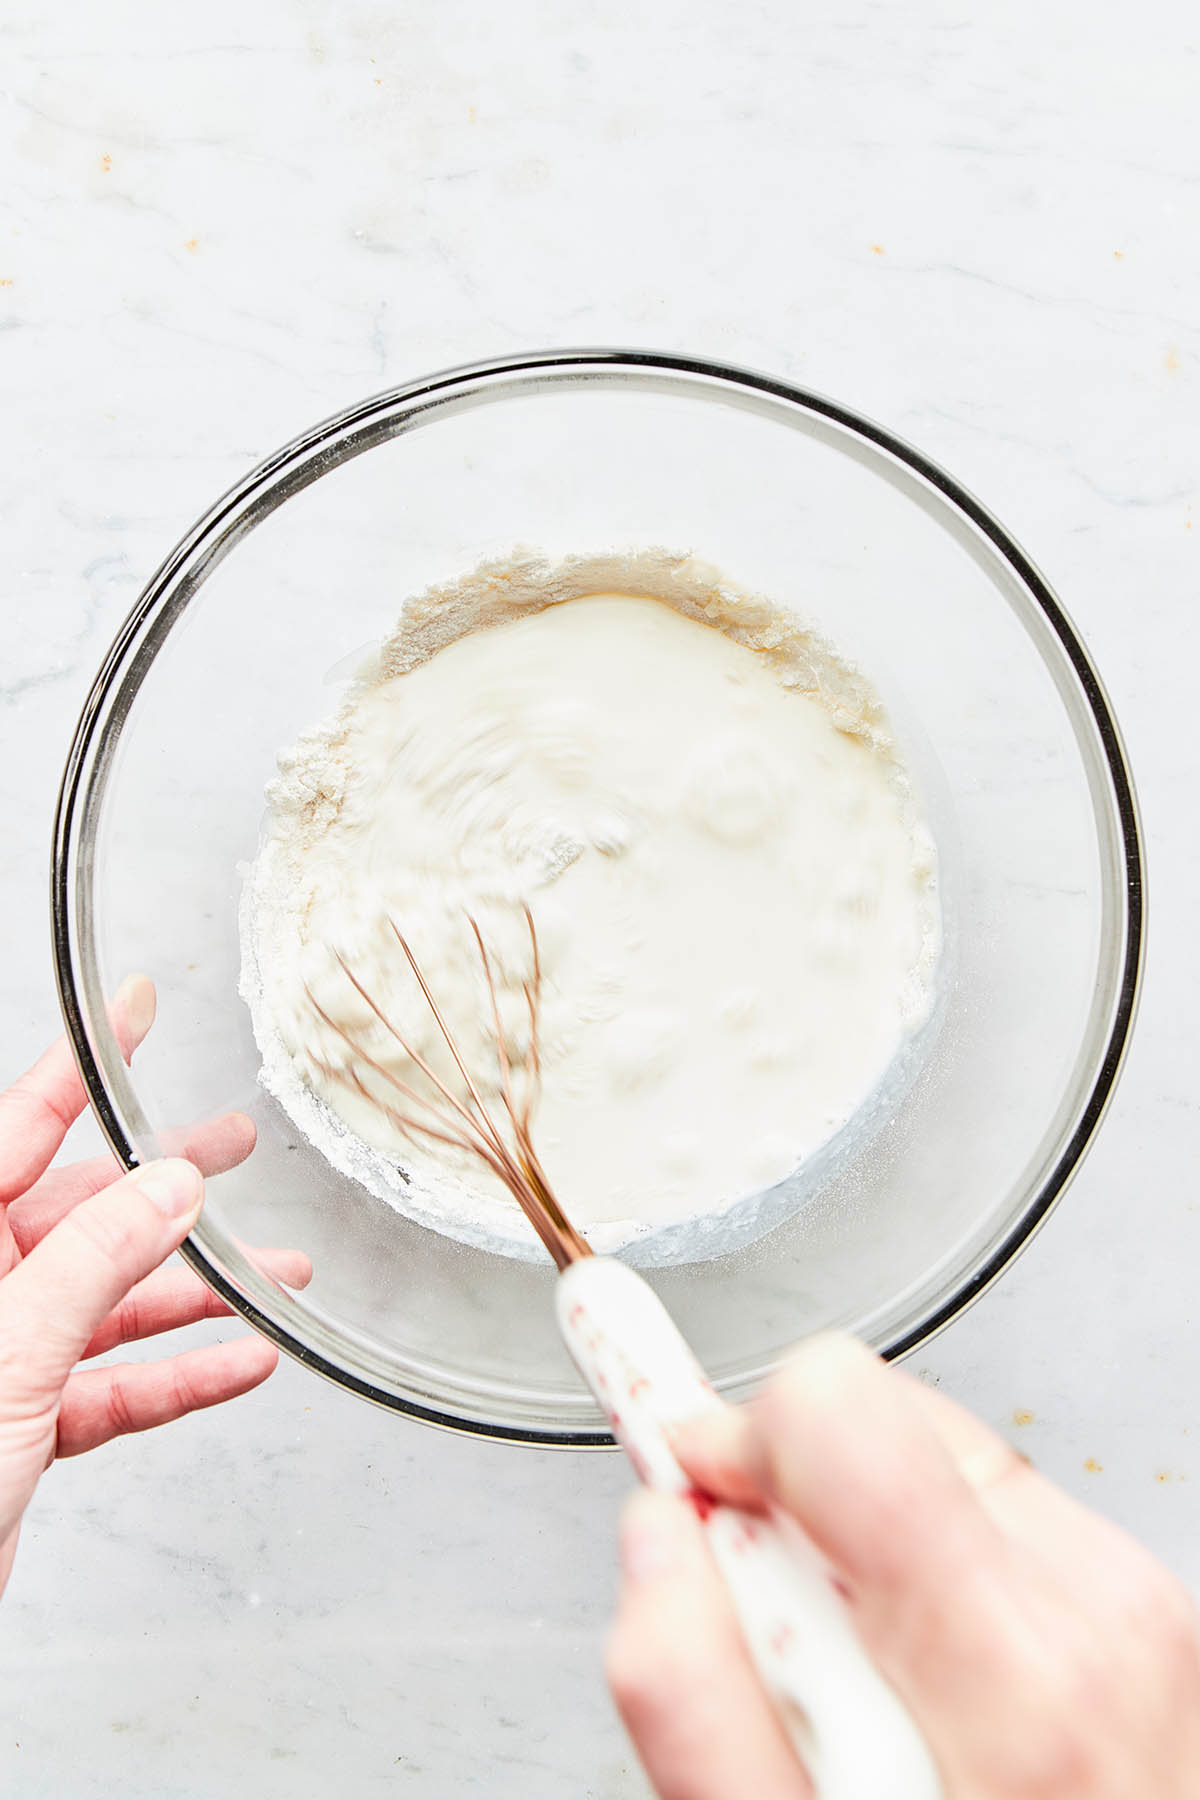 A hand using a whisk to mix ingredients in a glass bowl.